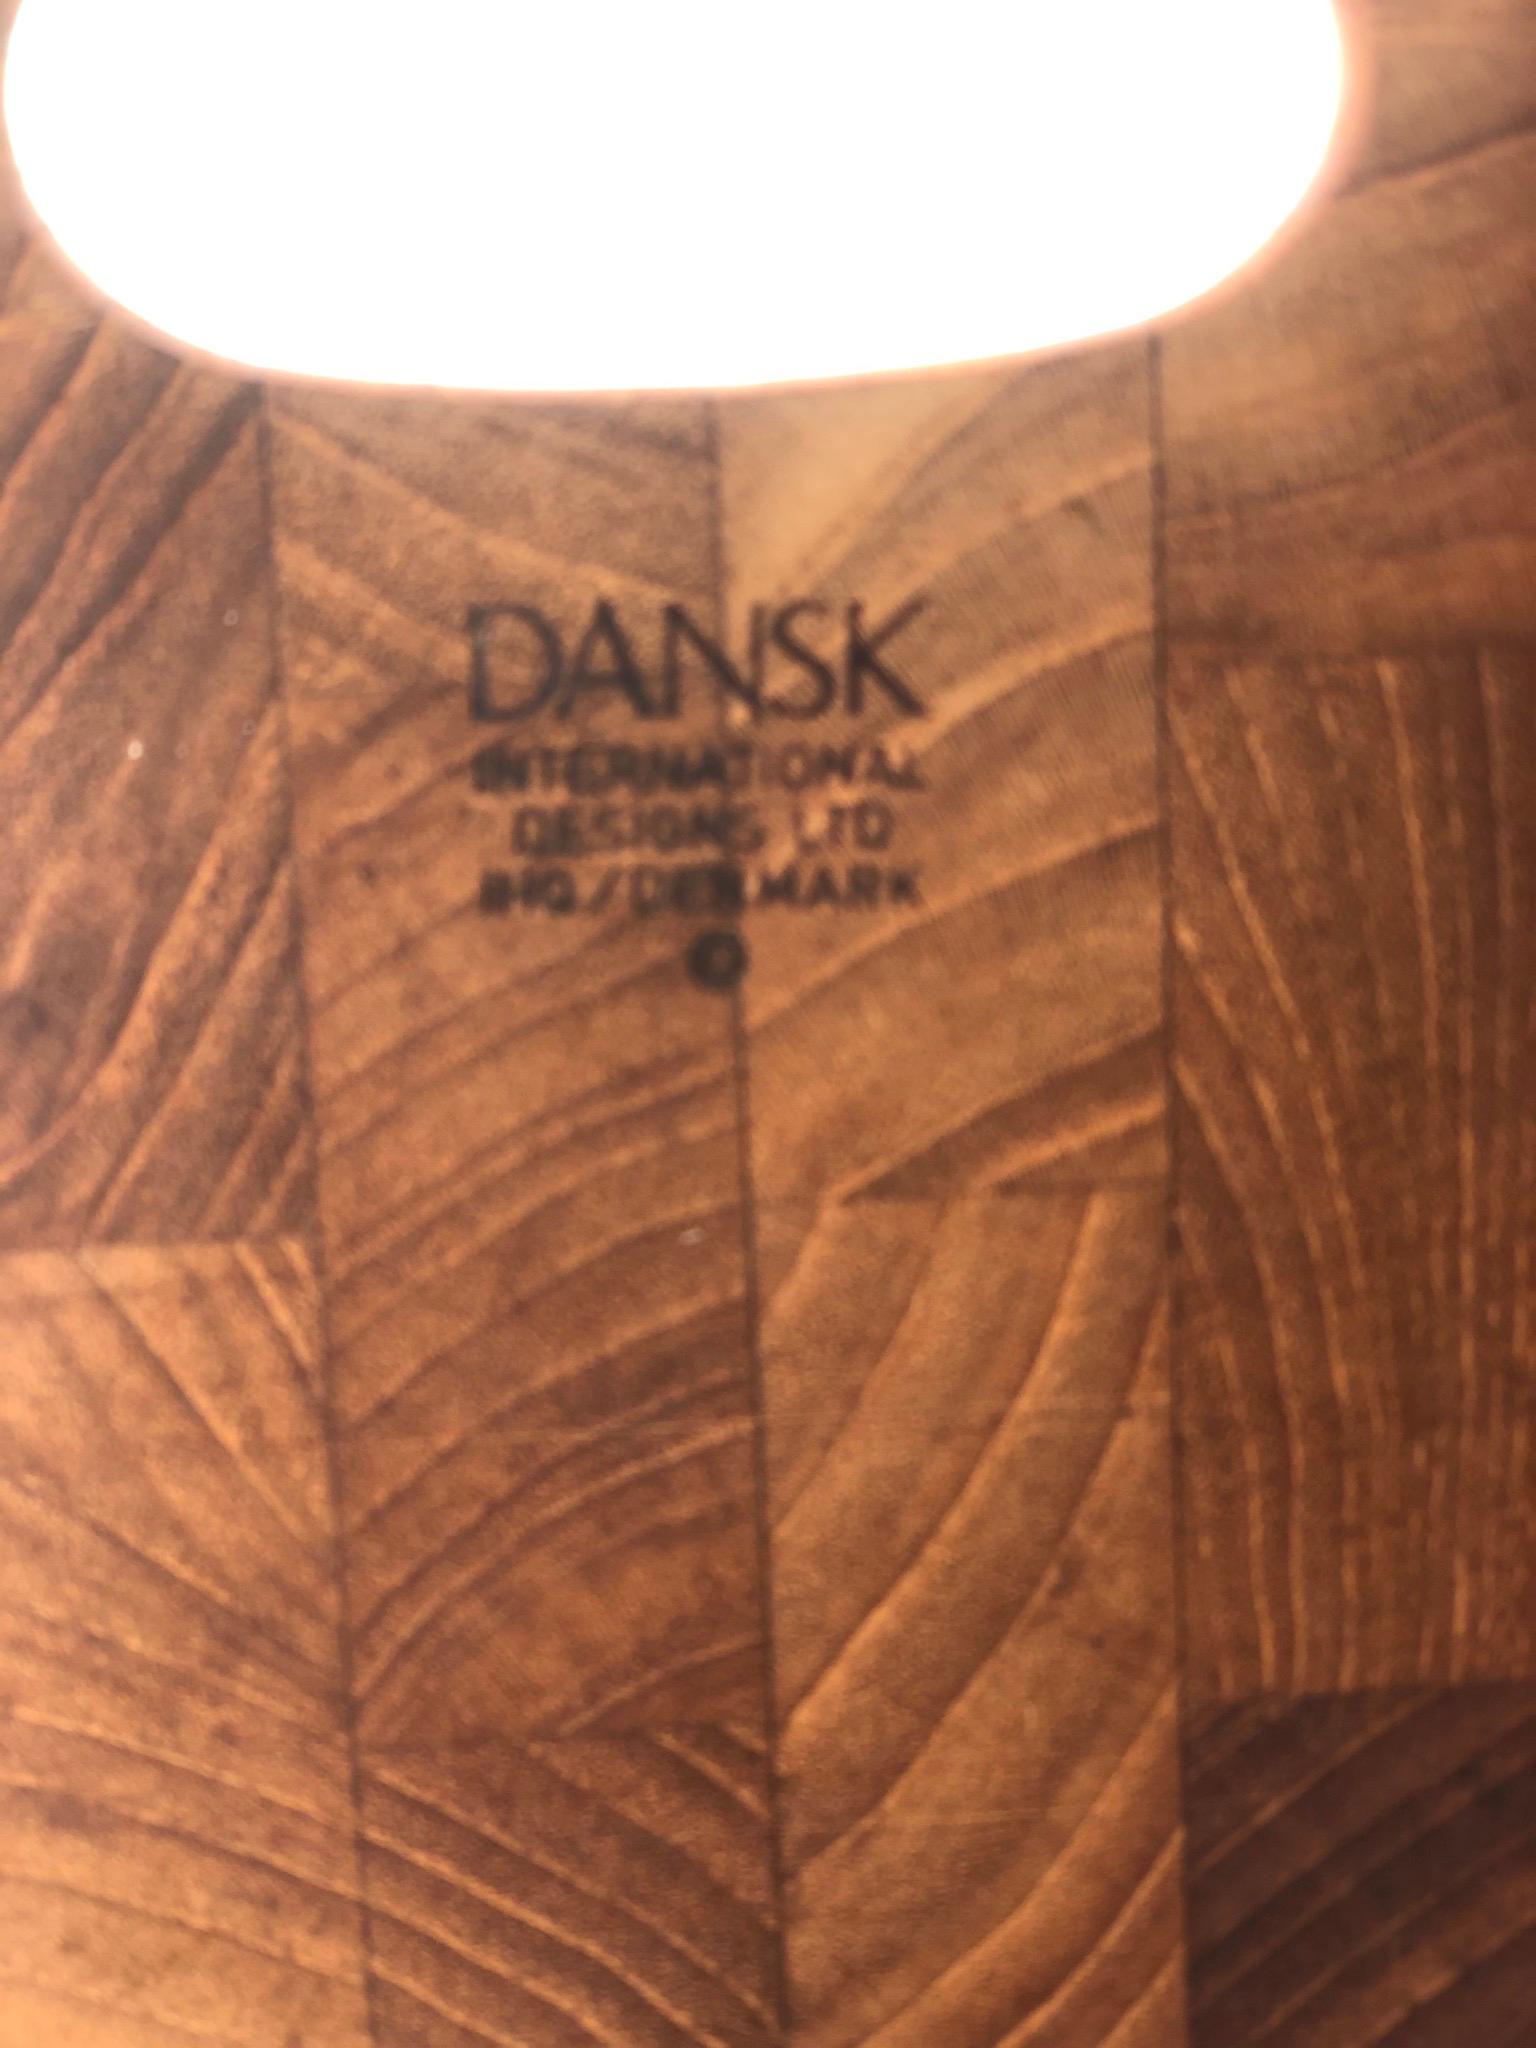 Danish Modern Solid Teak Cheese and Crackers Tray by Dansk Quistgaard In Excellent Condition For Sale In San Diego, CA